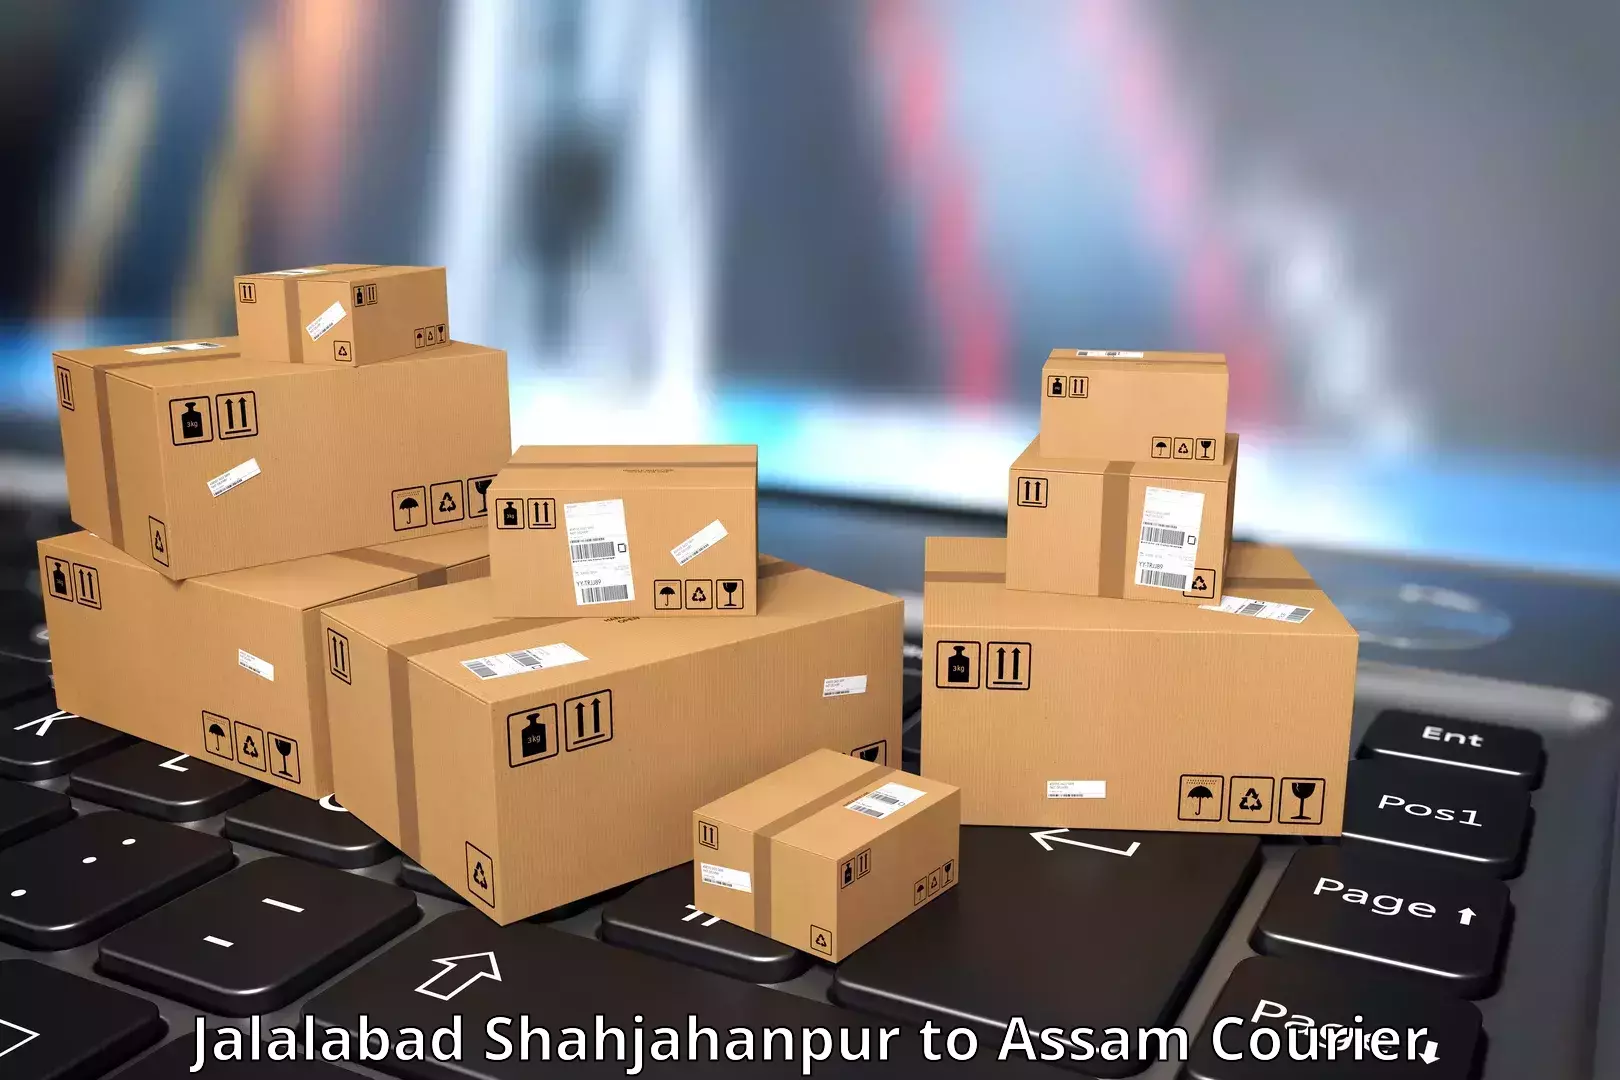 Express delivery capabilities Jalalabad Shahjahanpur to Guwahati